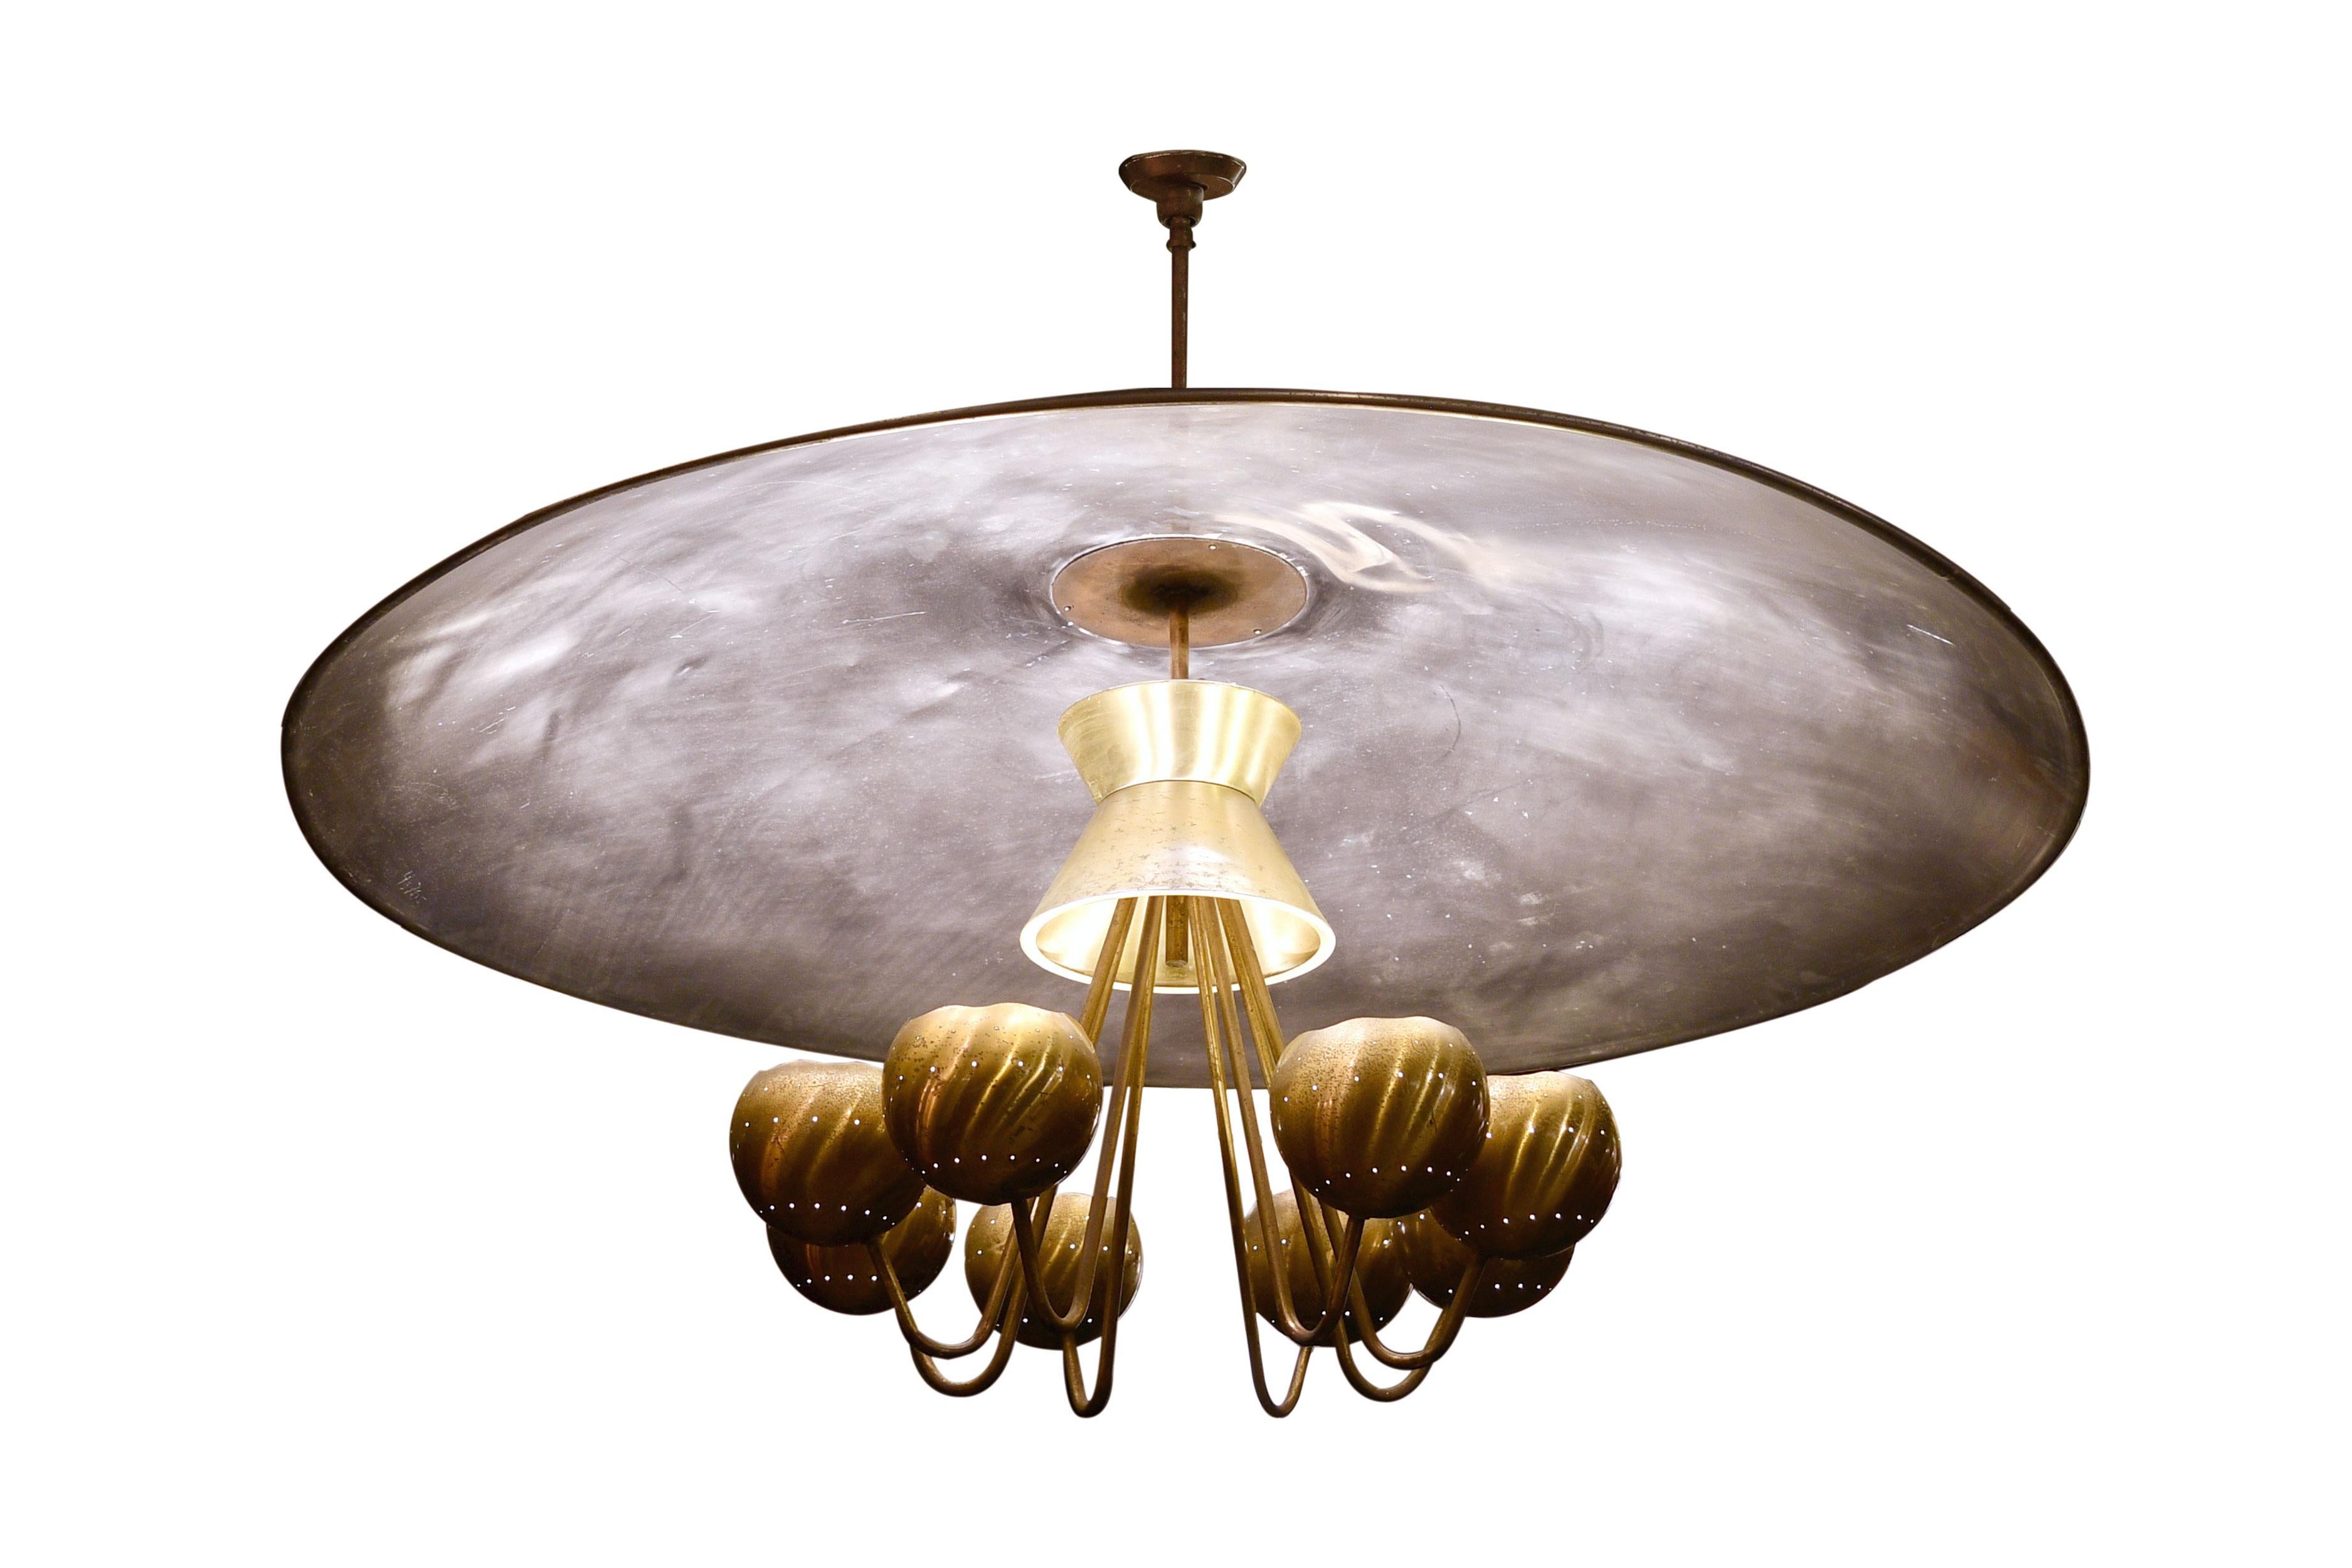 This light truly reflects the creativity that goes into lighting design! Although the main body is just thirty inch wide in diameter, this chandelier features an impressive five foot wide reflective bowl that throws light around to cast a warm glow.